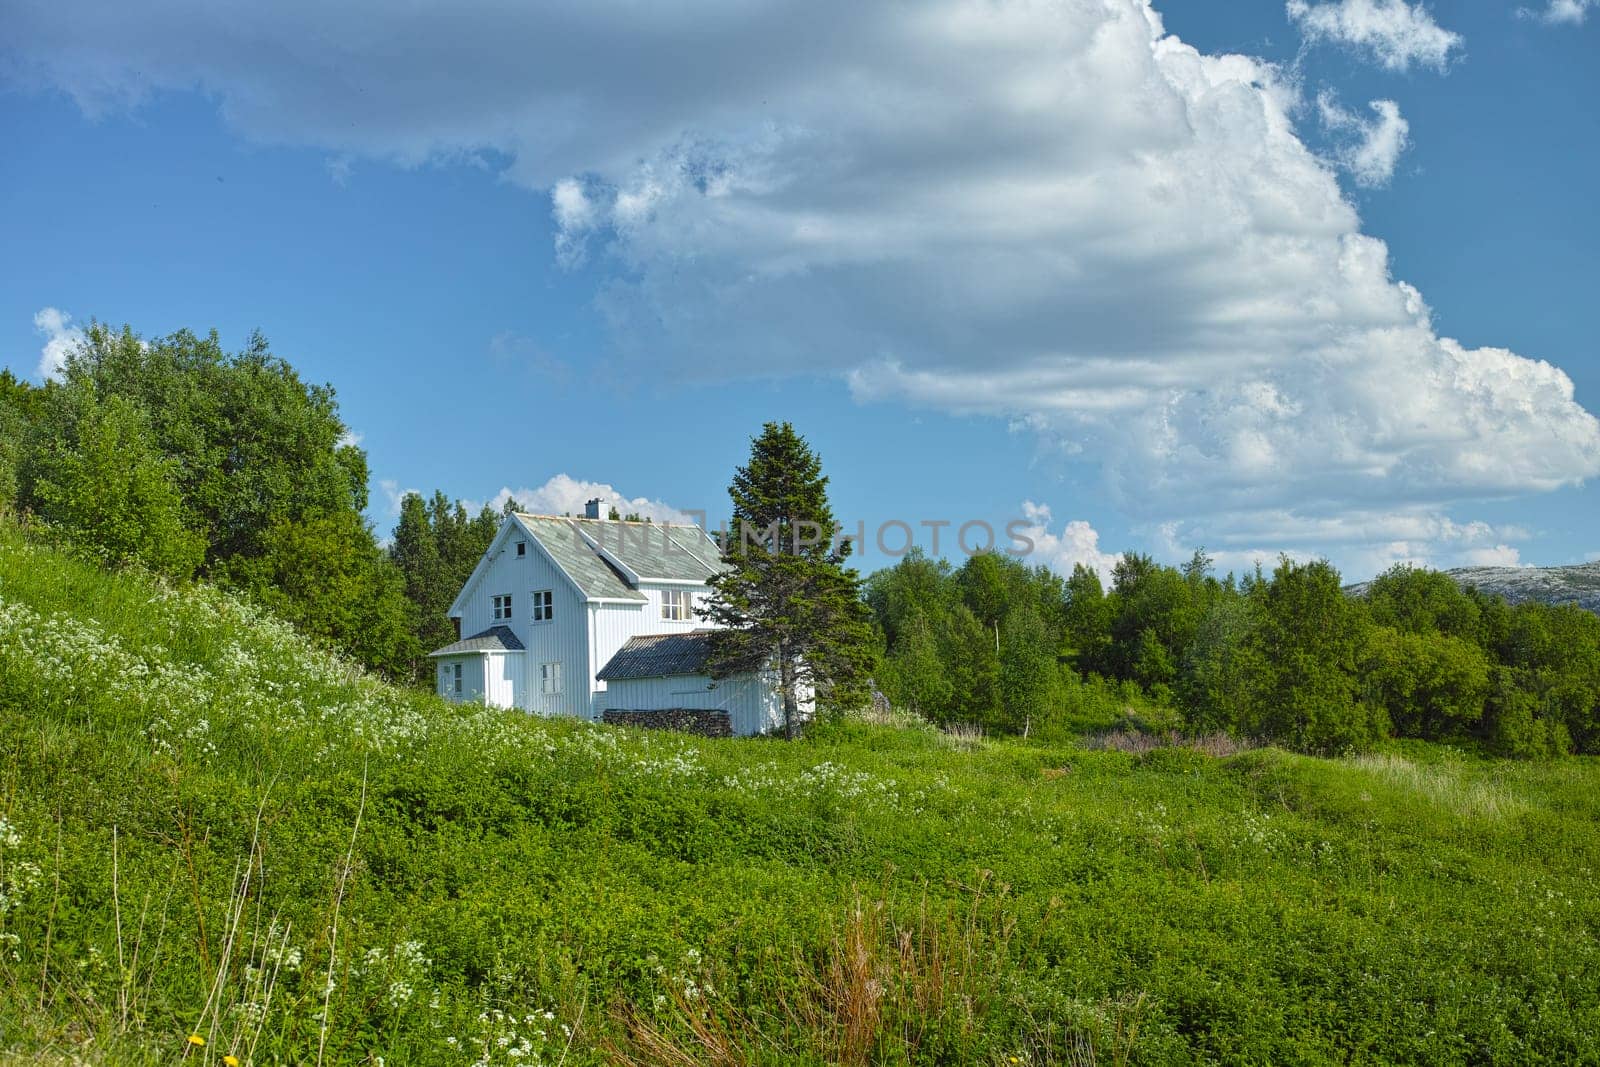 House, bush in village or countryside landscape, travel and adventure location with nature and buildings. Farm, real estate and property with architecture for holiday in Norway with trees and green.